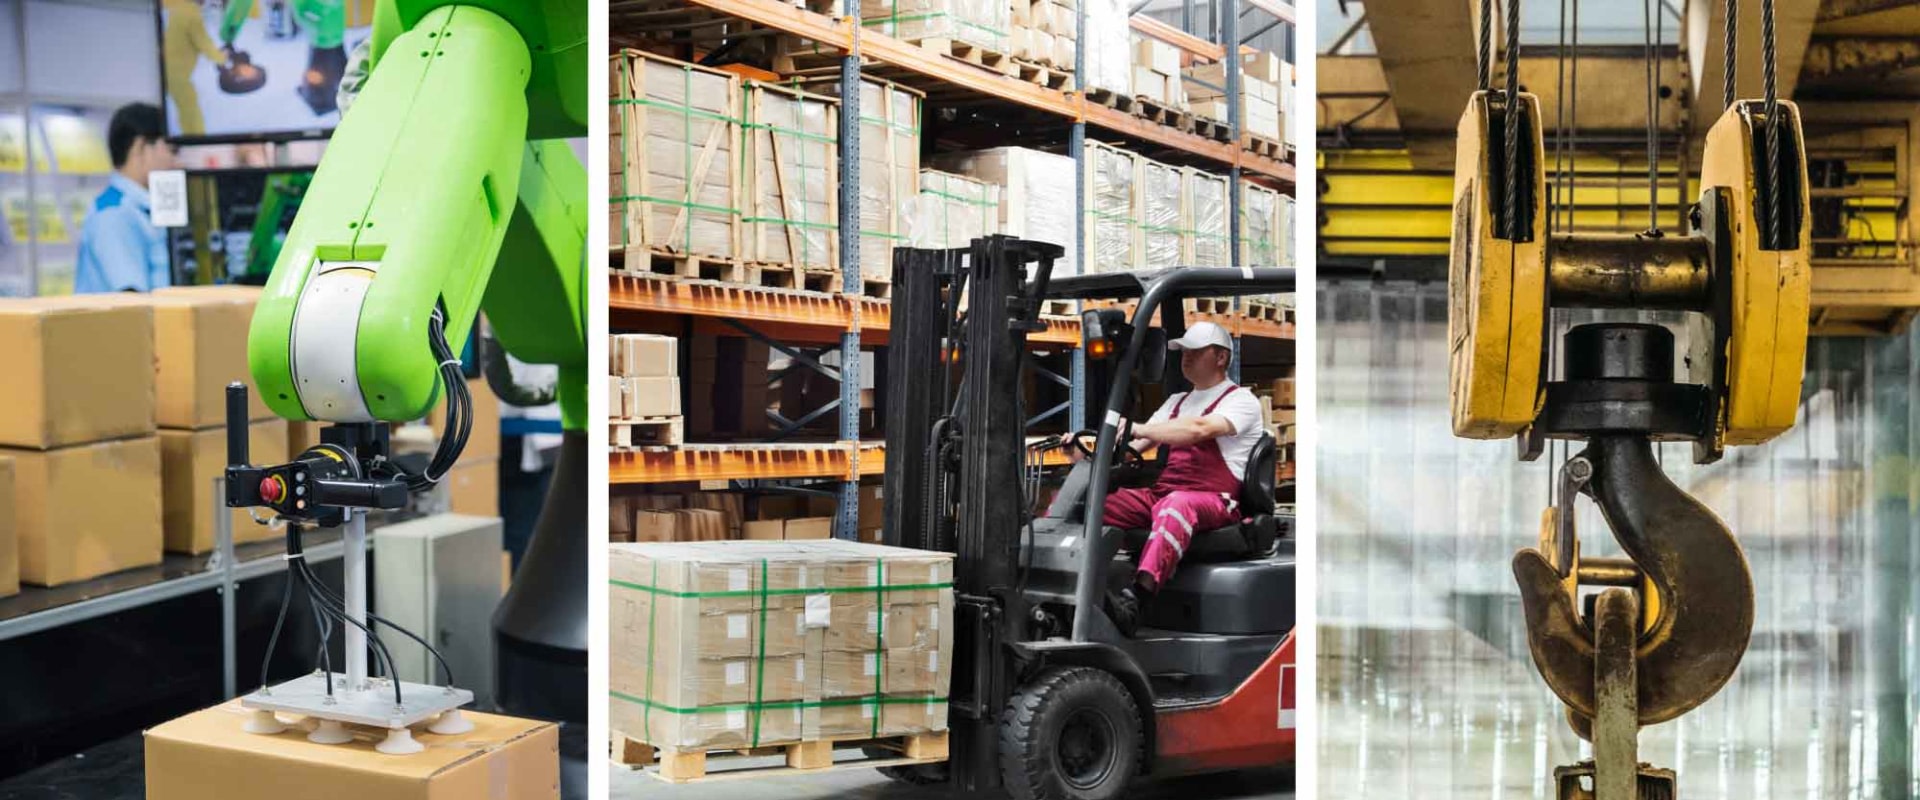 What are types of material handling?